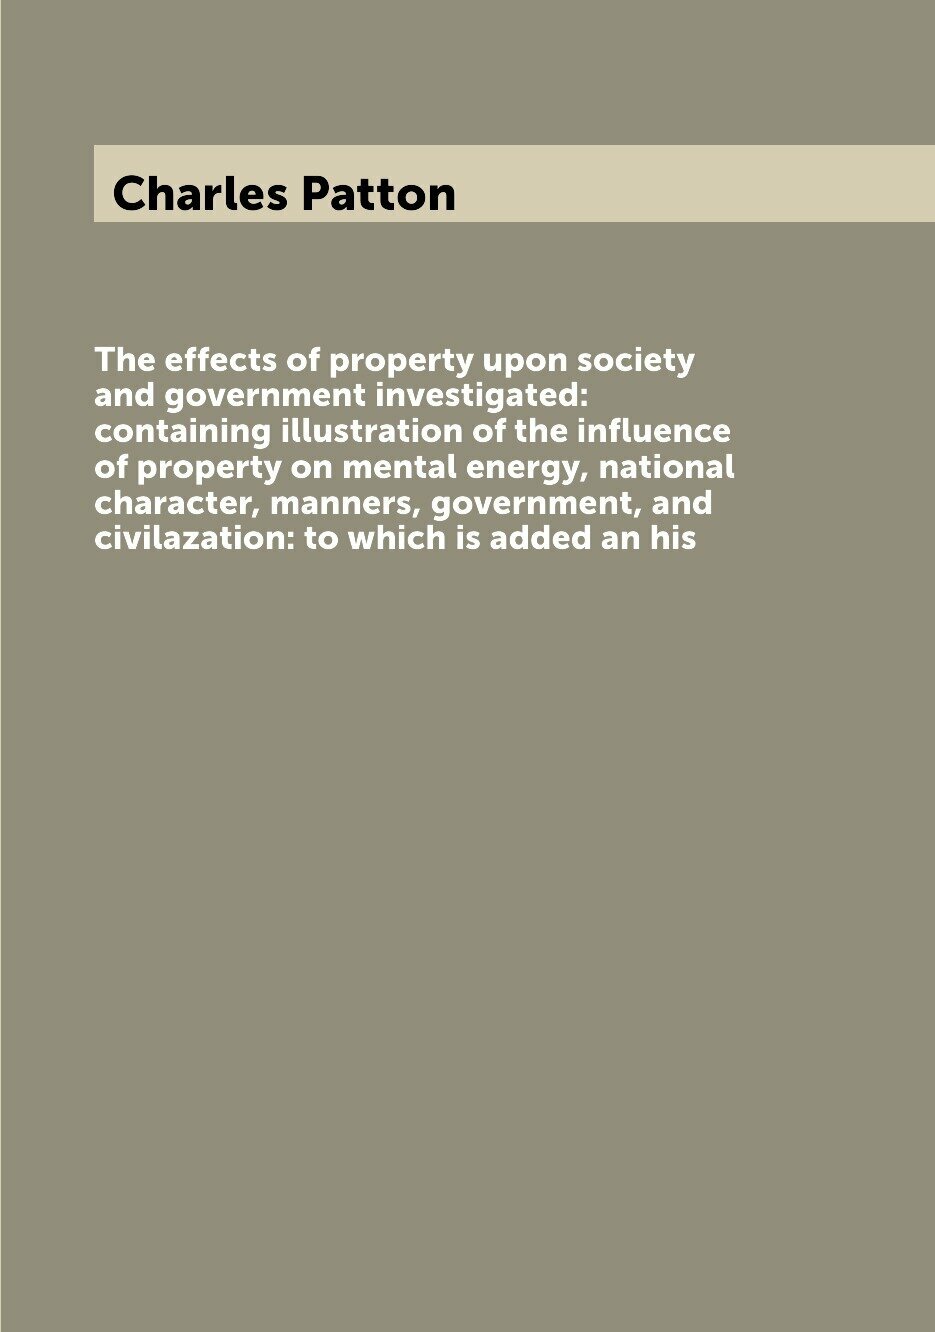 The effects of property upon society and government investigated: containing illustration of the influence of property on mental energy, national character, manners, government, and civilazation: to which is added an his